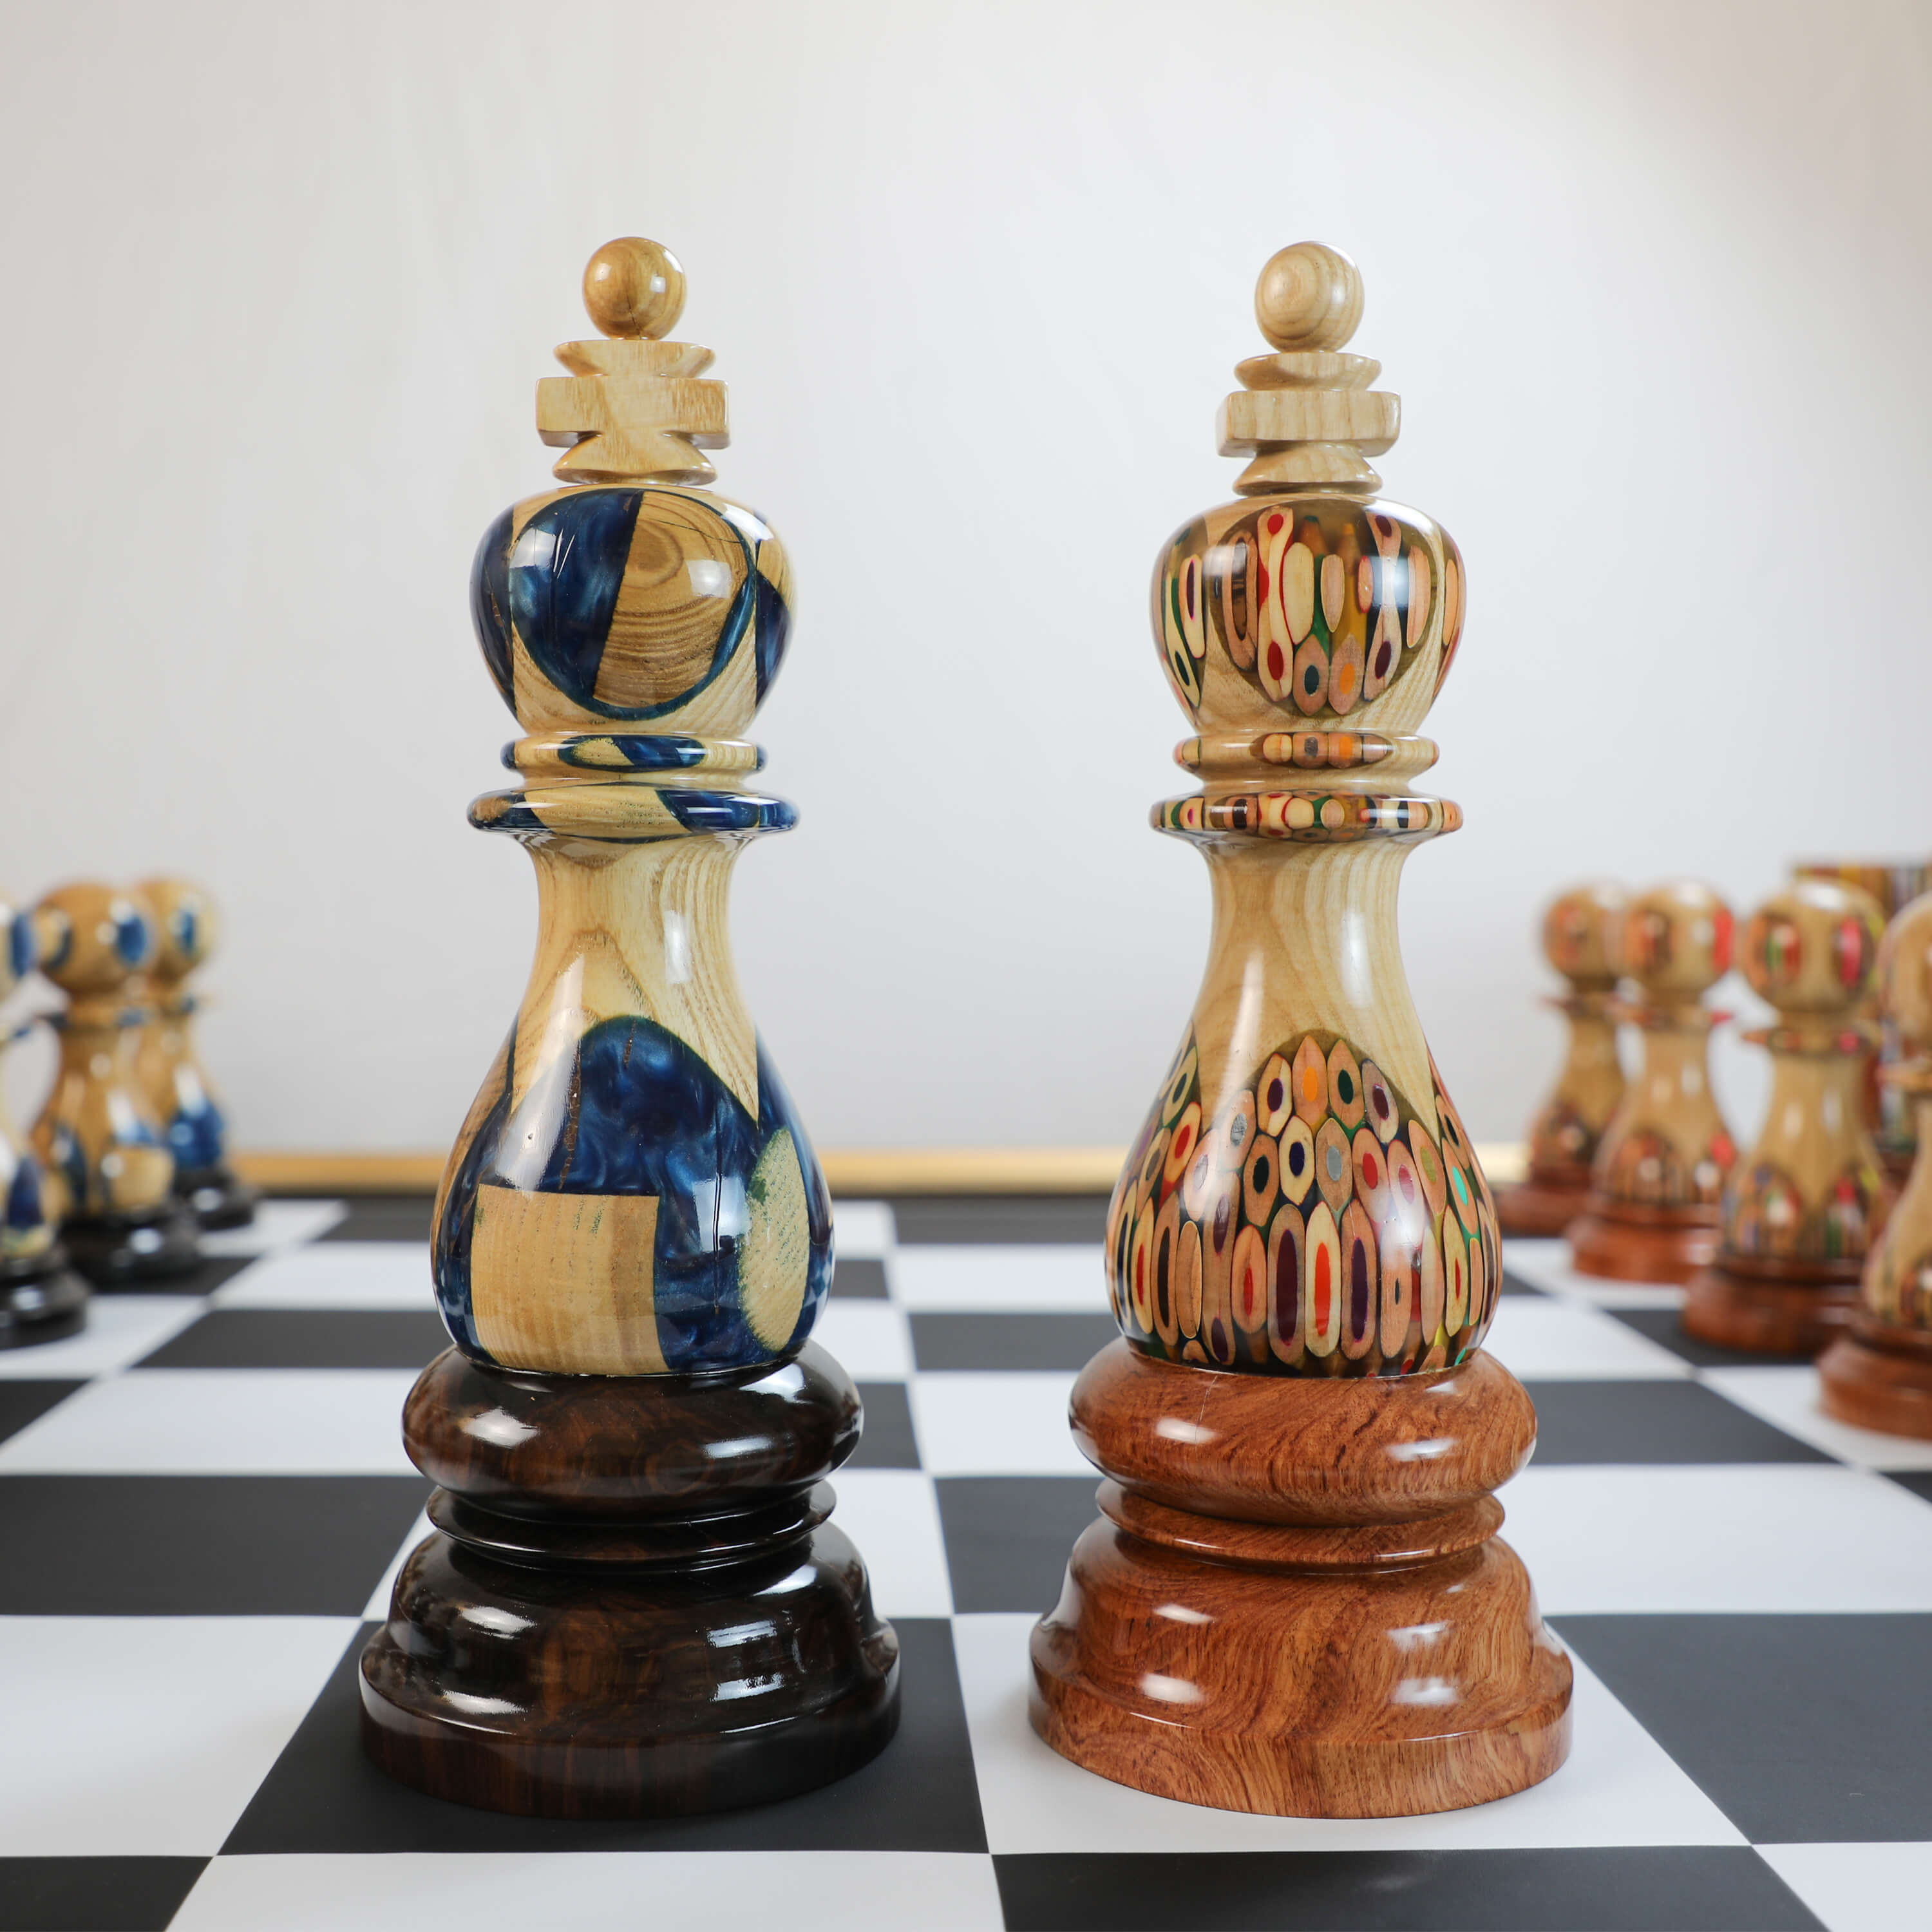 Giant Deluxe Chess Piece the Knight Blended of Wood Resin 